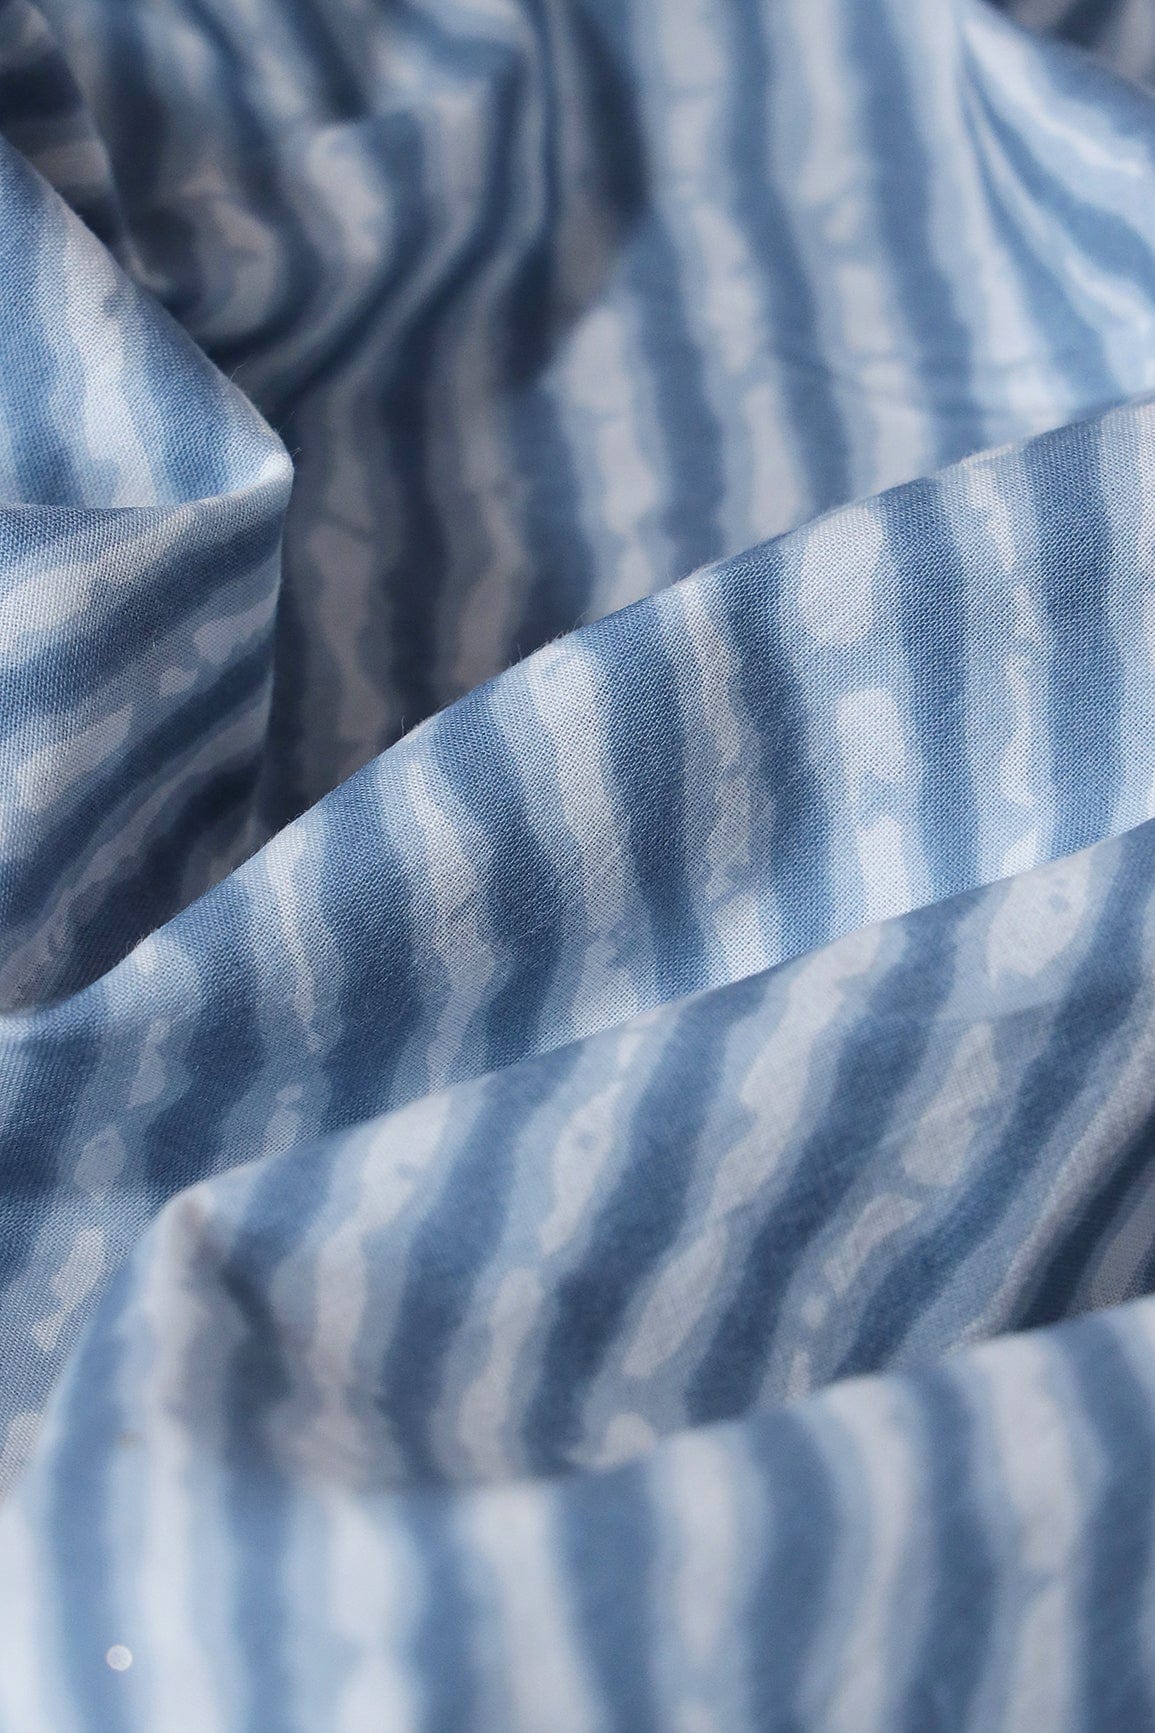 doeraa Prints Pastel Blue And White Stripes Print On Pure Cotton Fabric